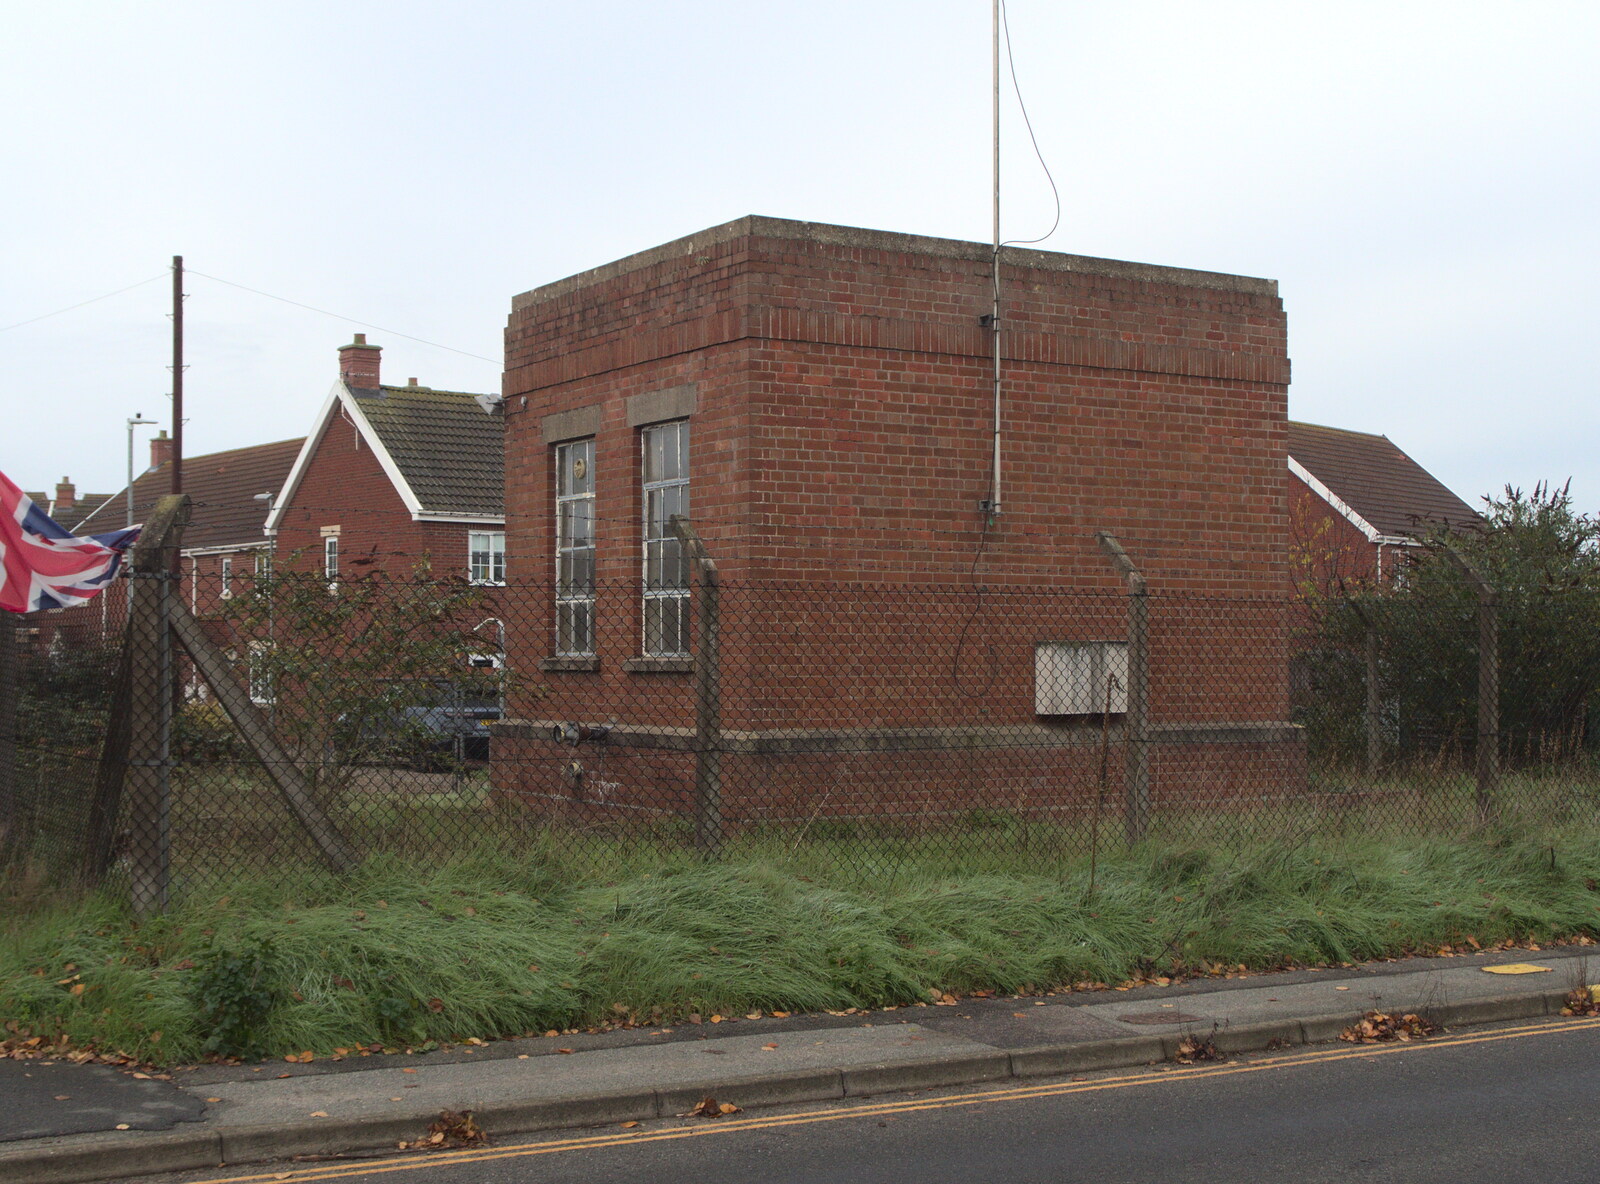 A telephone exchange on Sawmills Road from Lunch in Norwich and the GSB at Gislingham, Suffolk - 26th November 2022